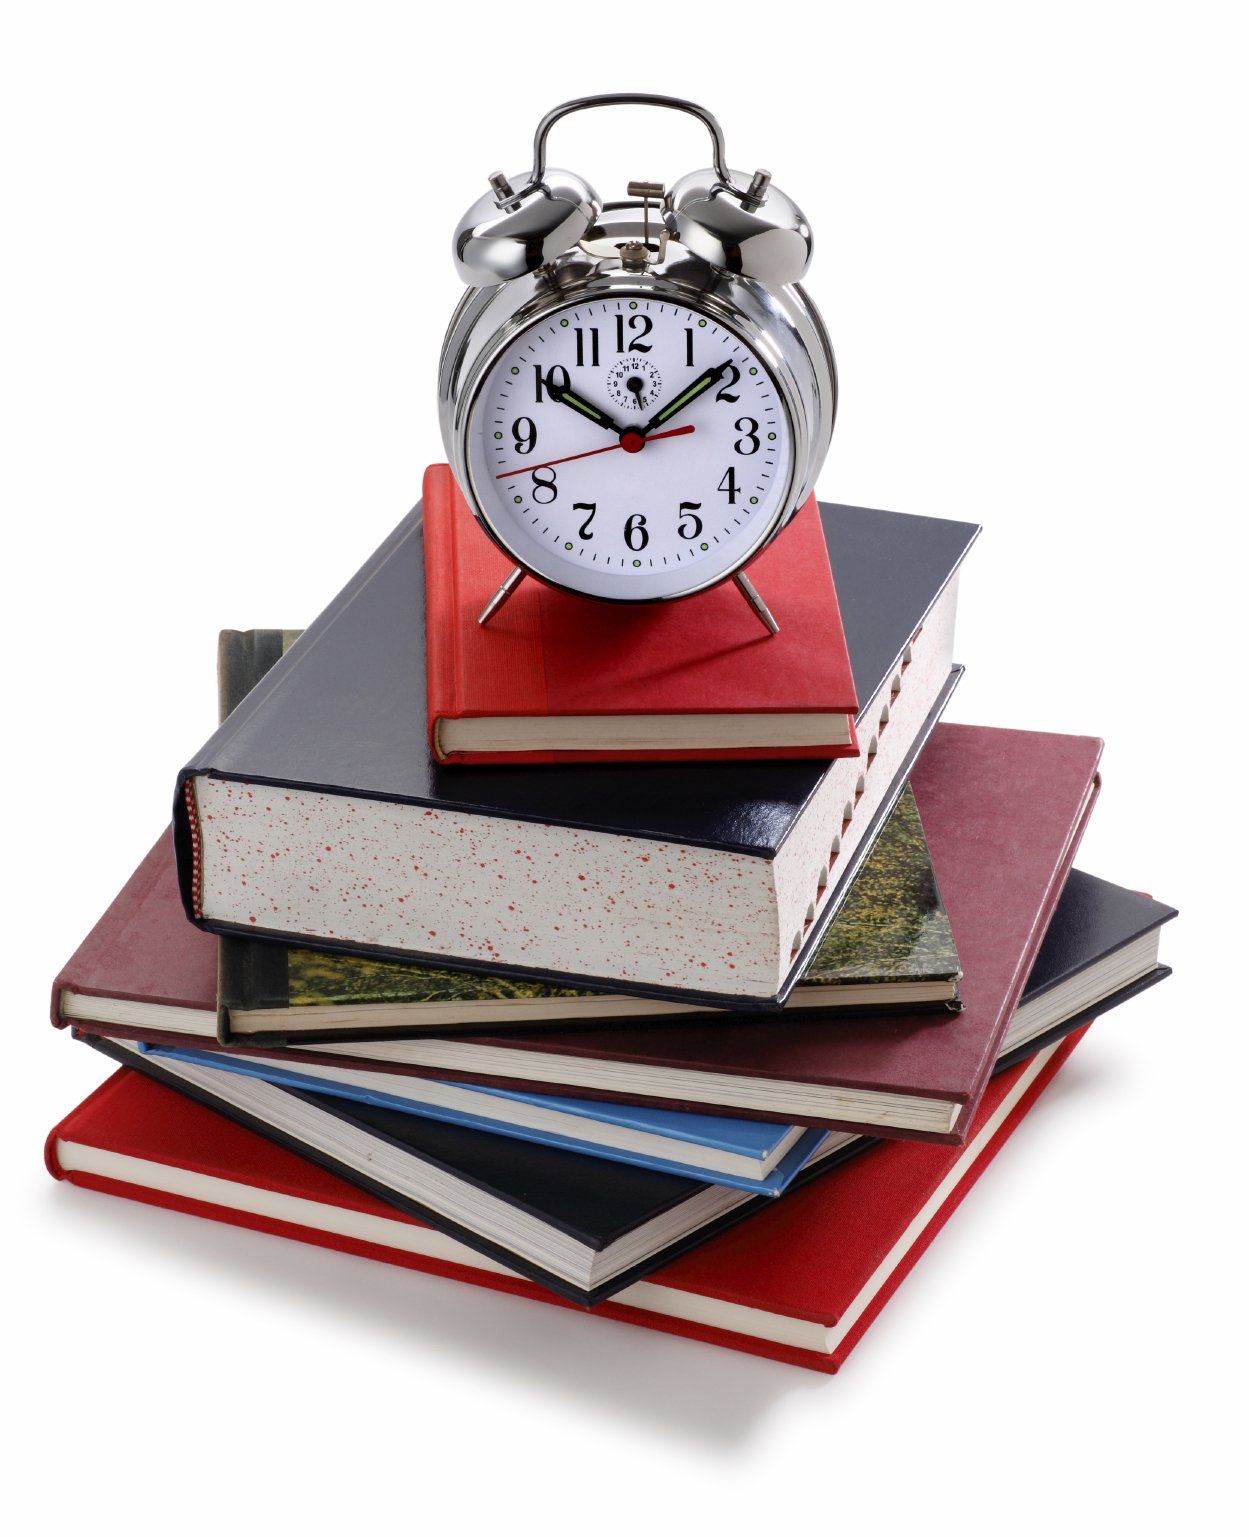 A double-bell, traditional alarm clock sitting on a stack of colorful books.